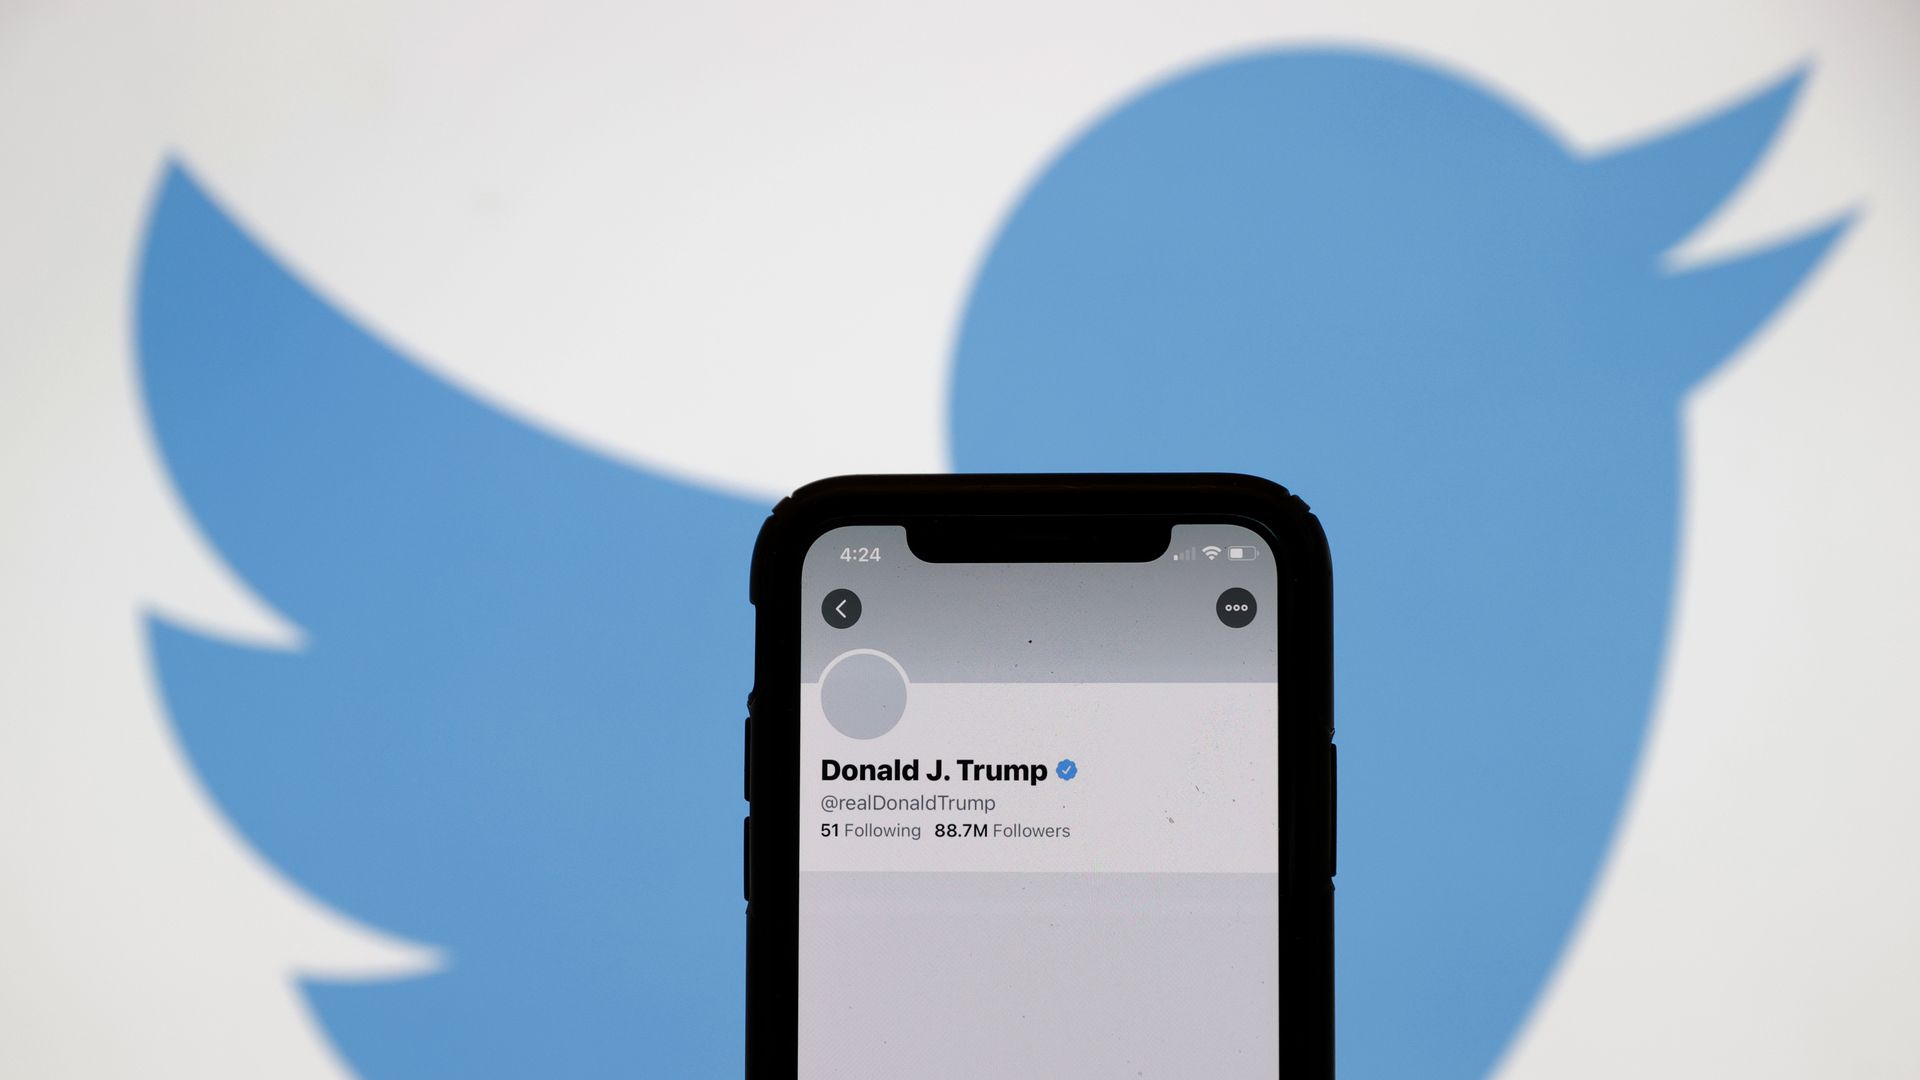 A smartphone is seen in front of the Twitter logo after President Trump was banned from the app.